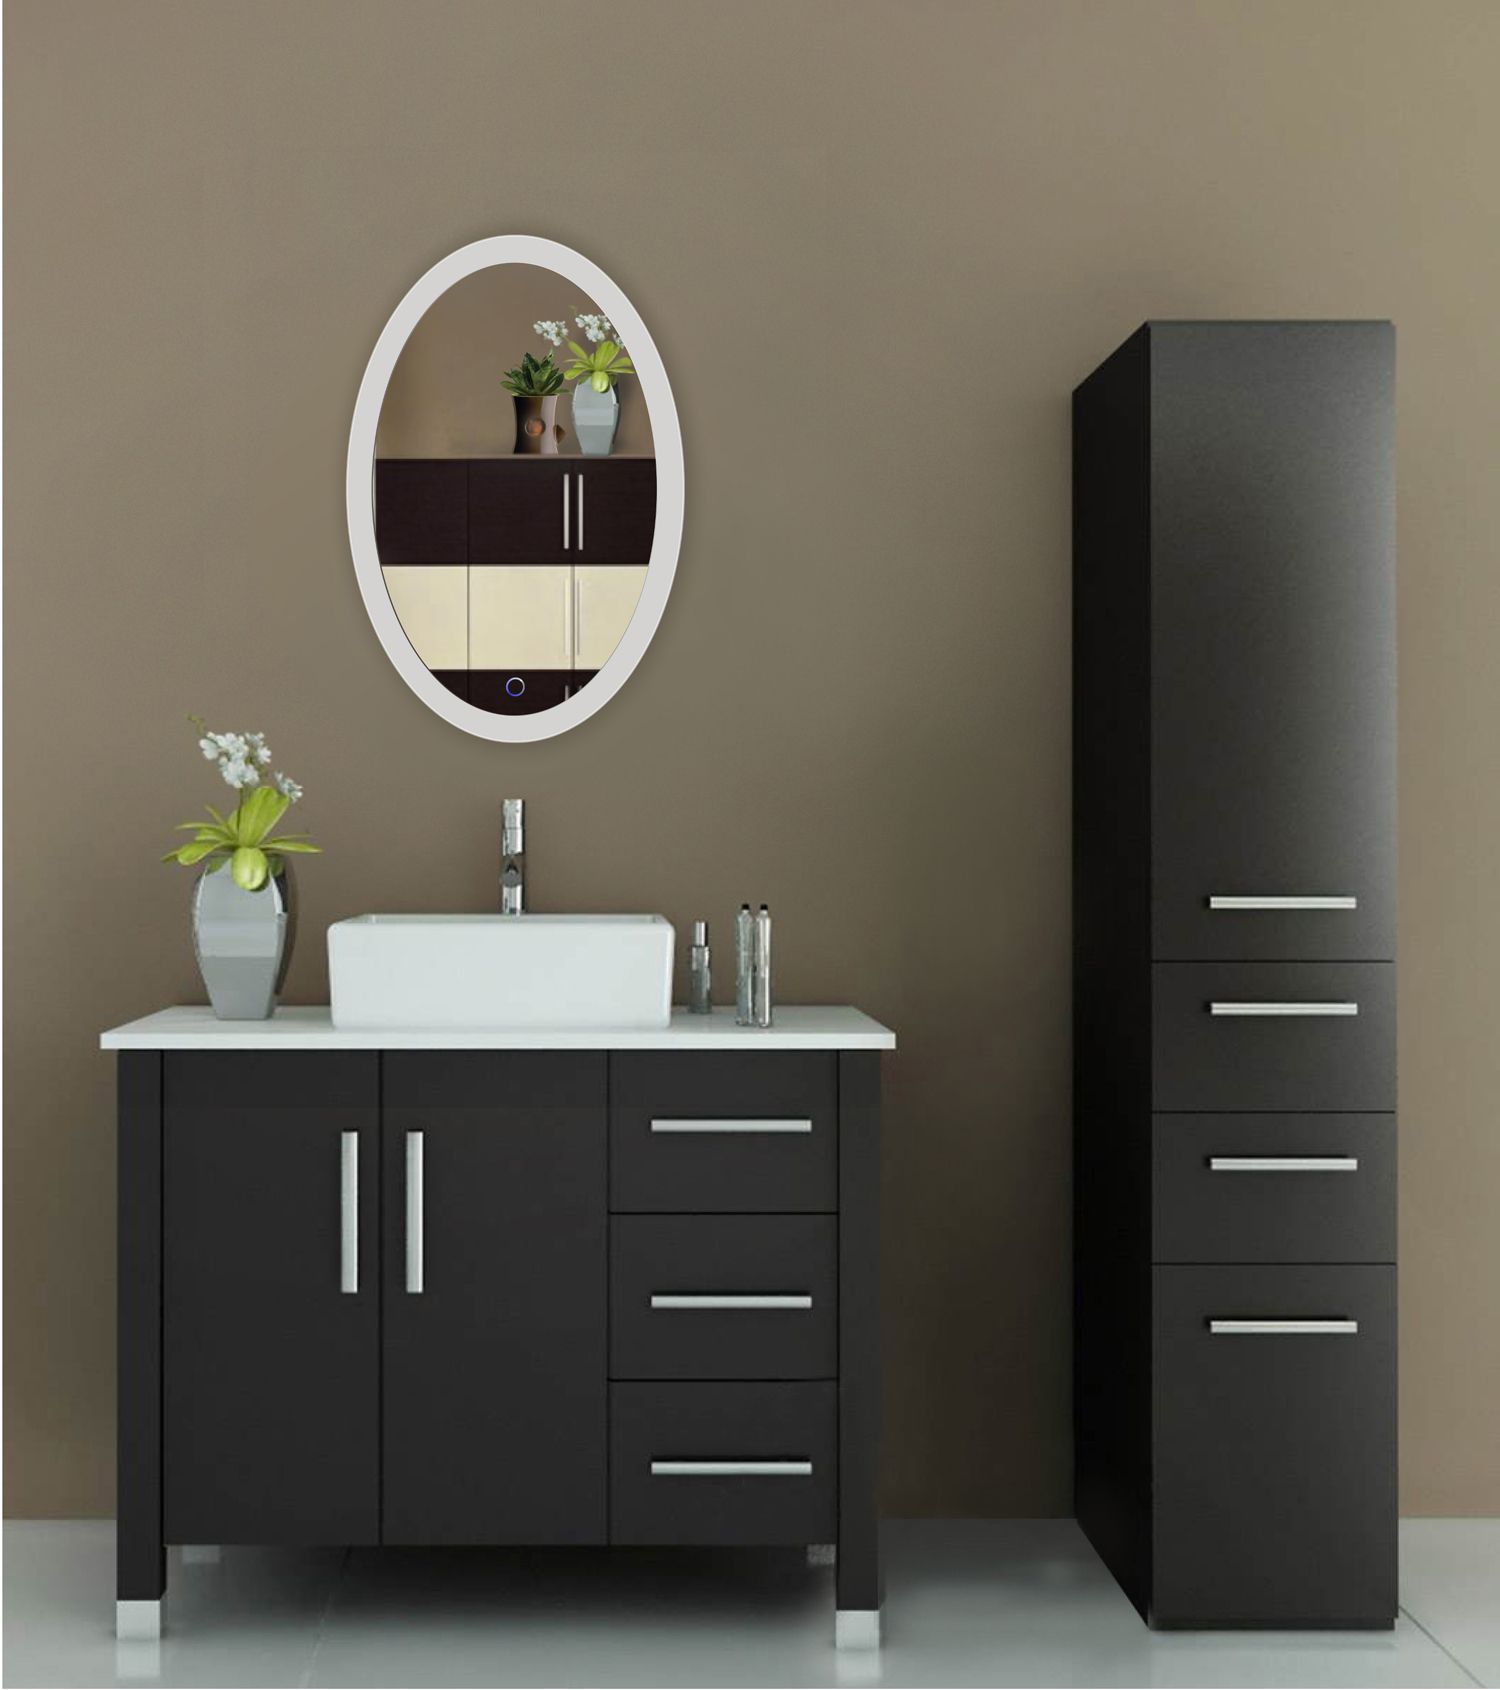 Sol Oval 20″ X 30″ Led Bathroom Mirror W/ Dimmer & Defogger | Oval Back In Back Lit Oval Led Wall Mirrors (View 9 of 15)